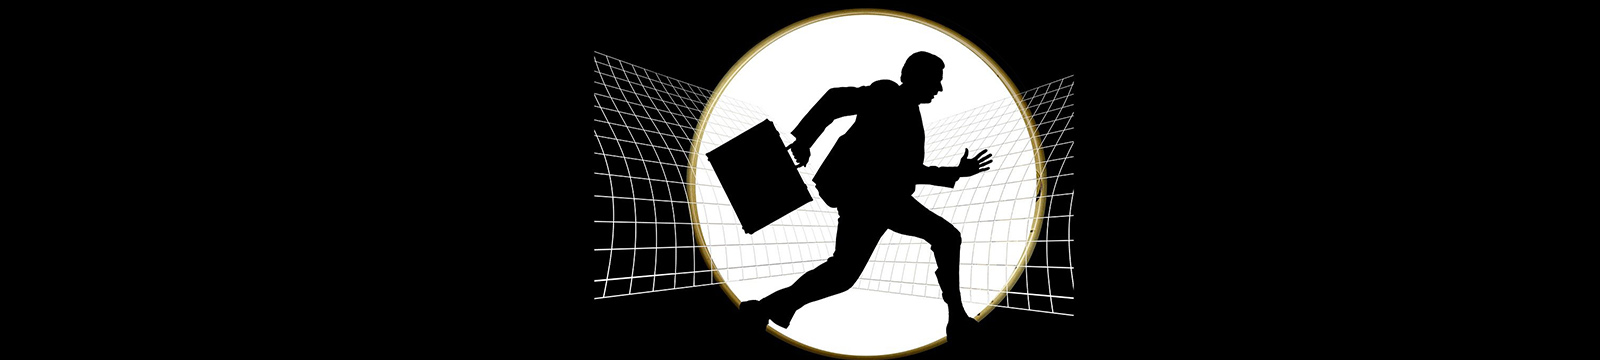 Illustrated silhouette of business man running with briefcase. 